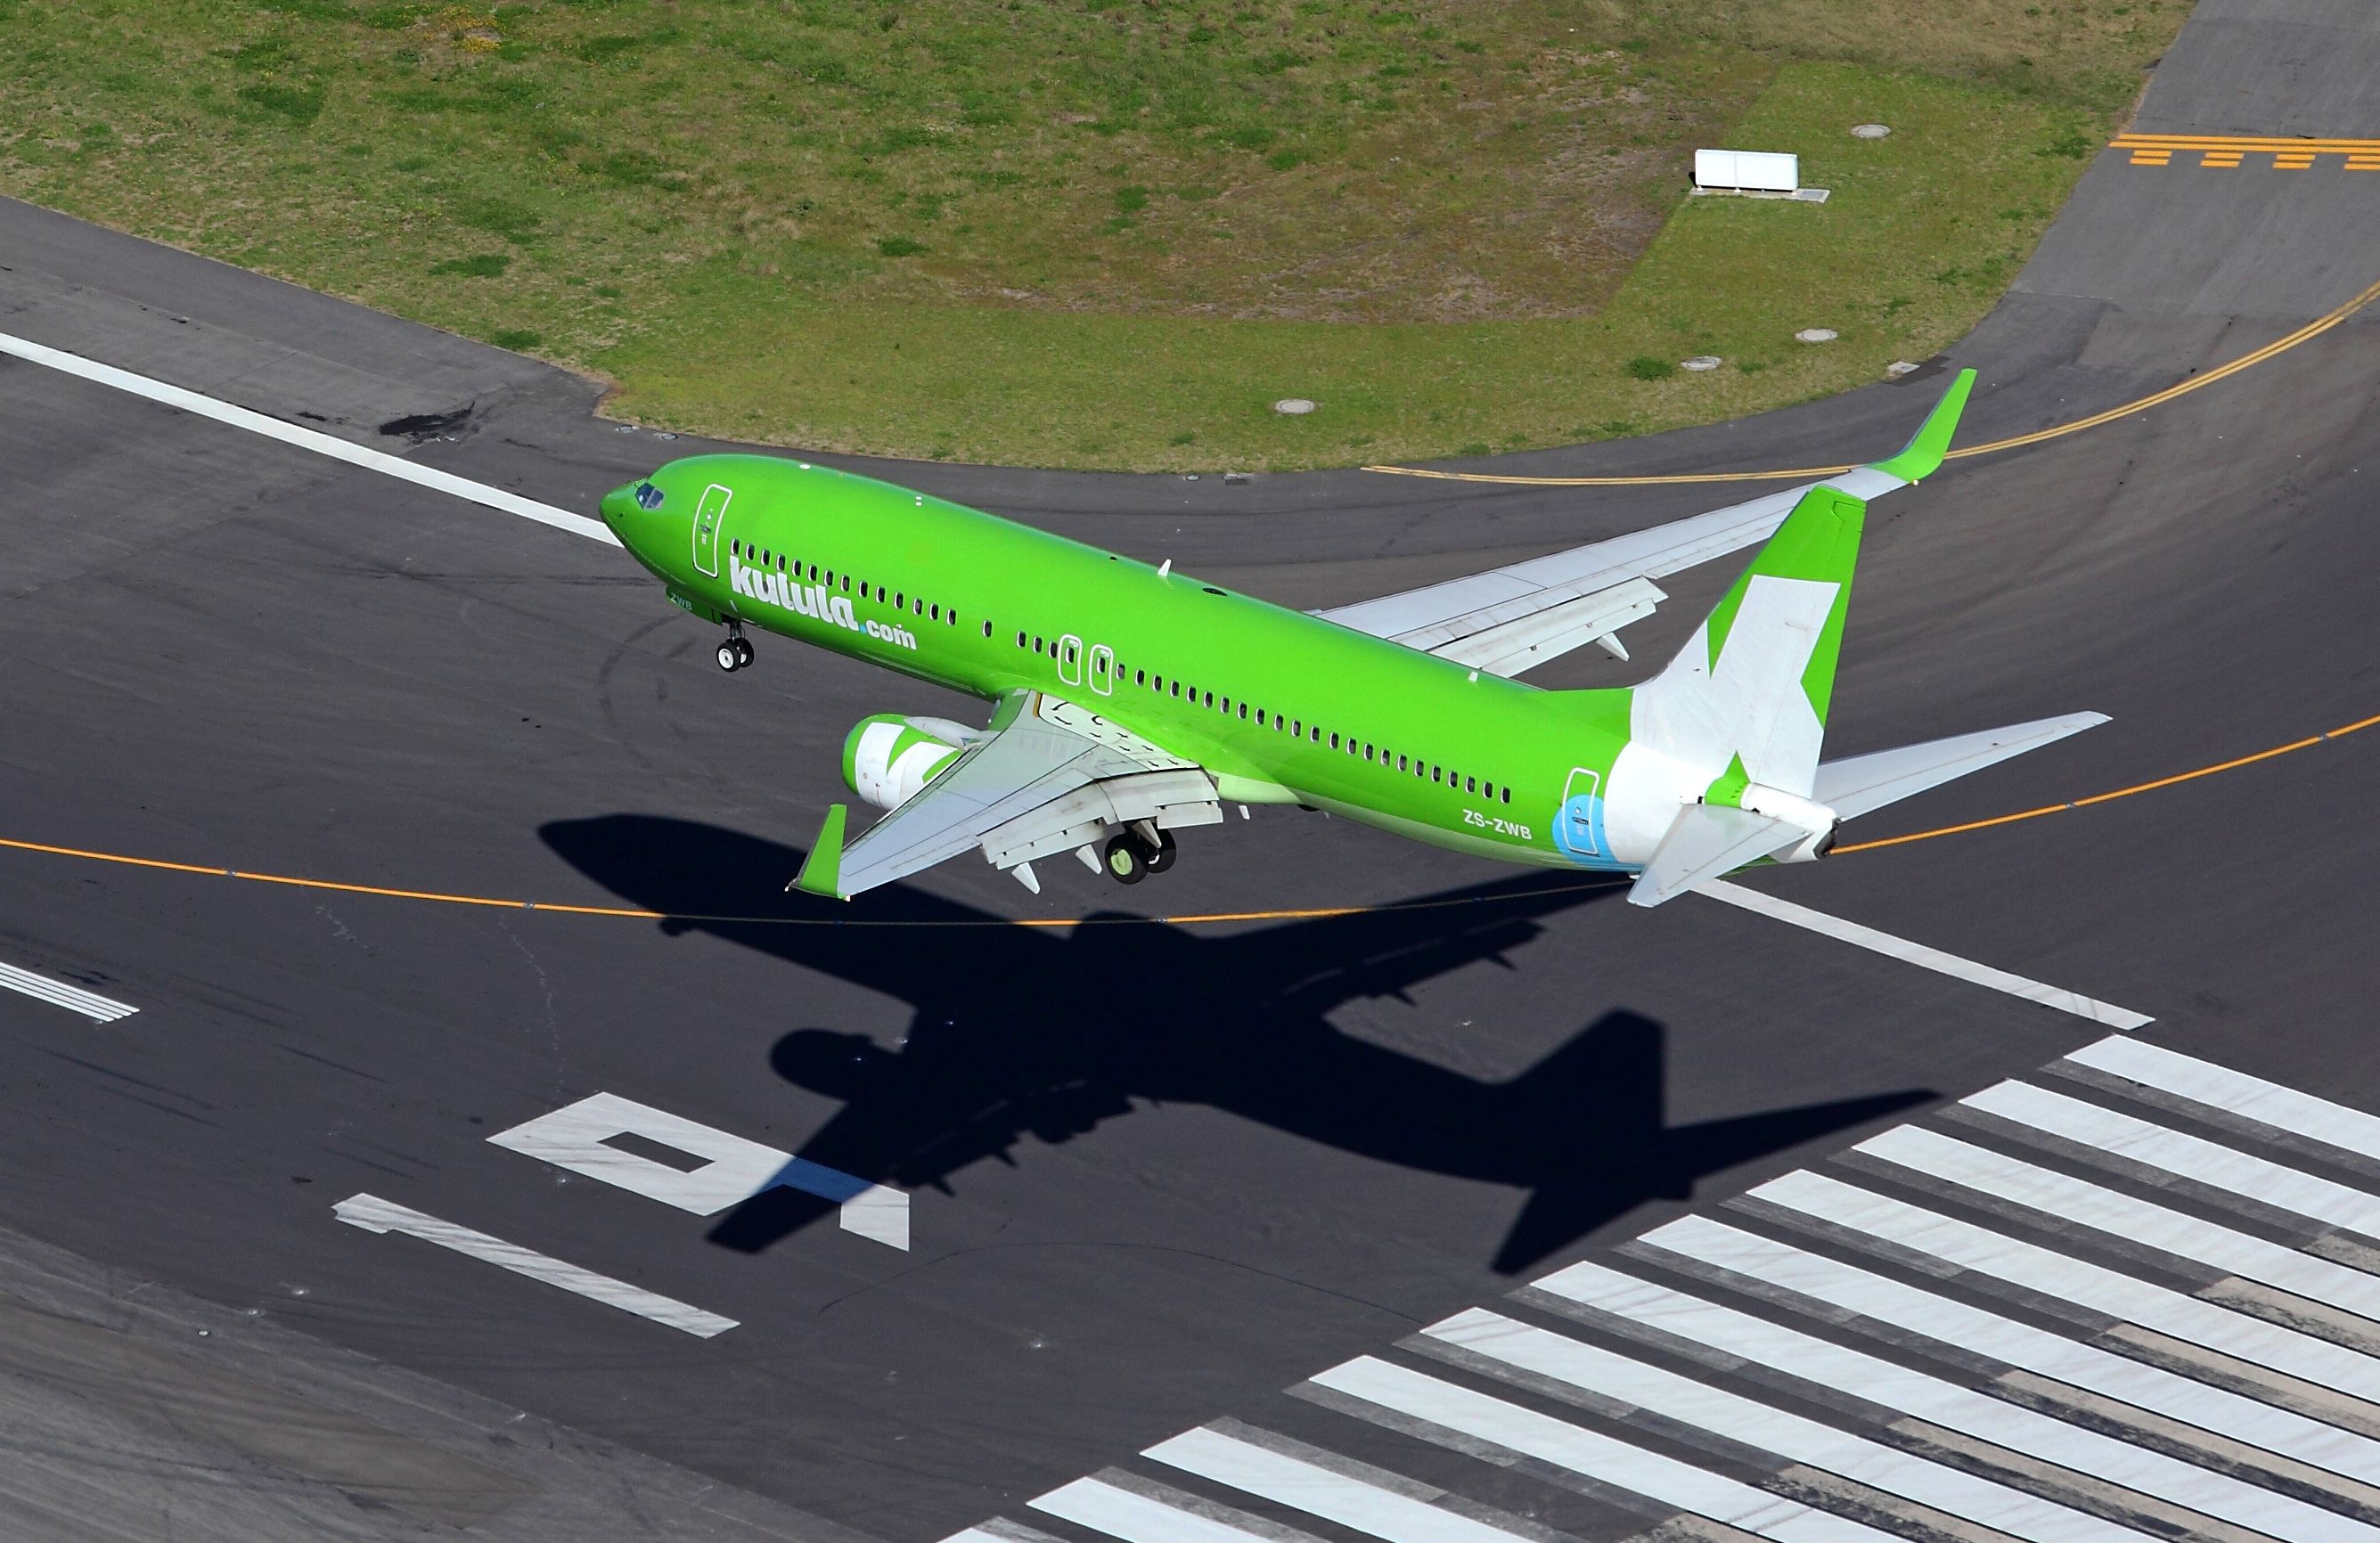 Comair's low cost carrier Kulula.com